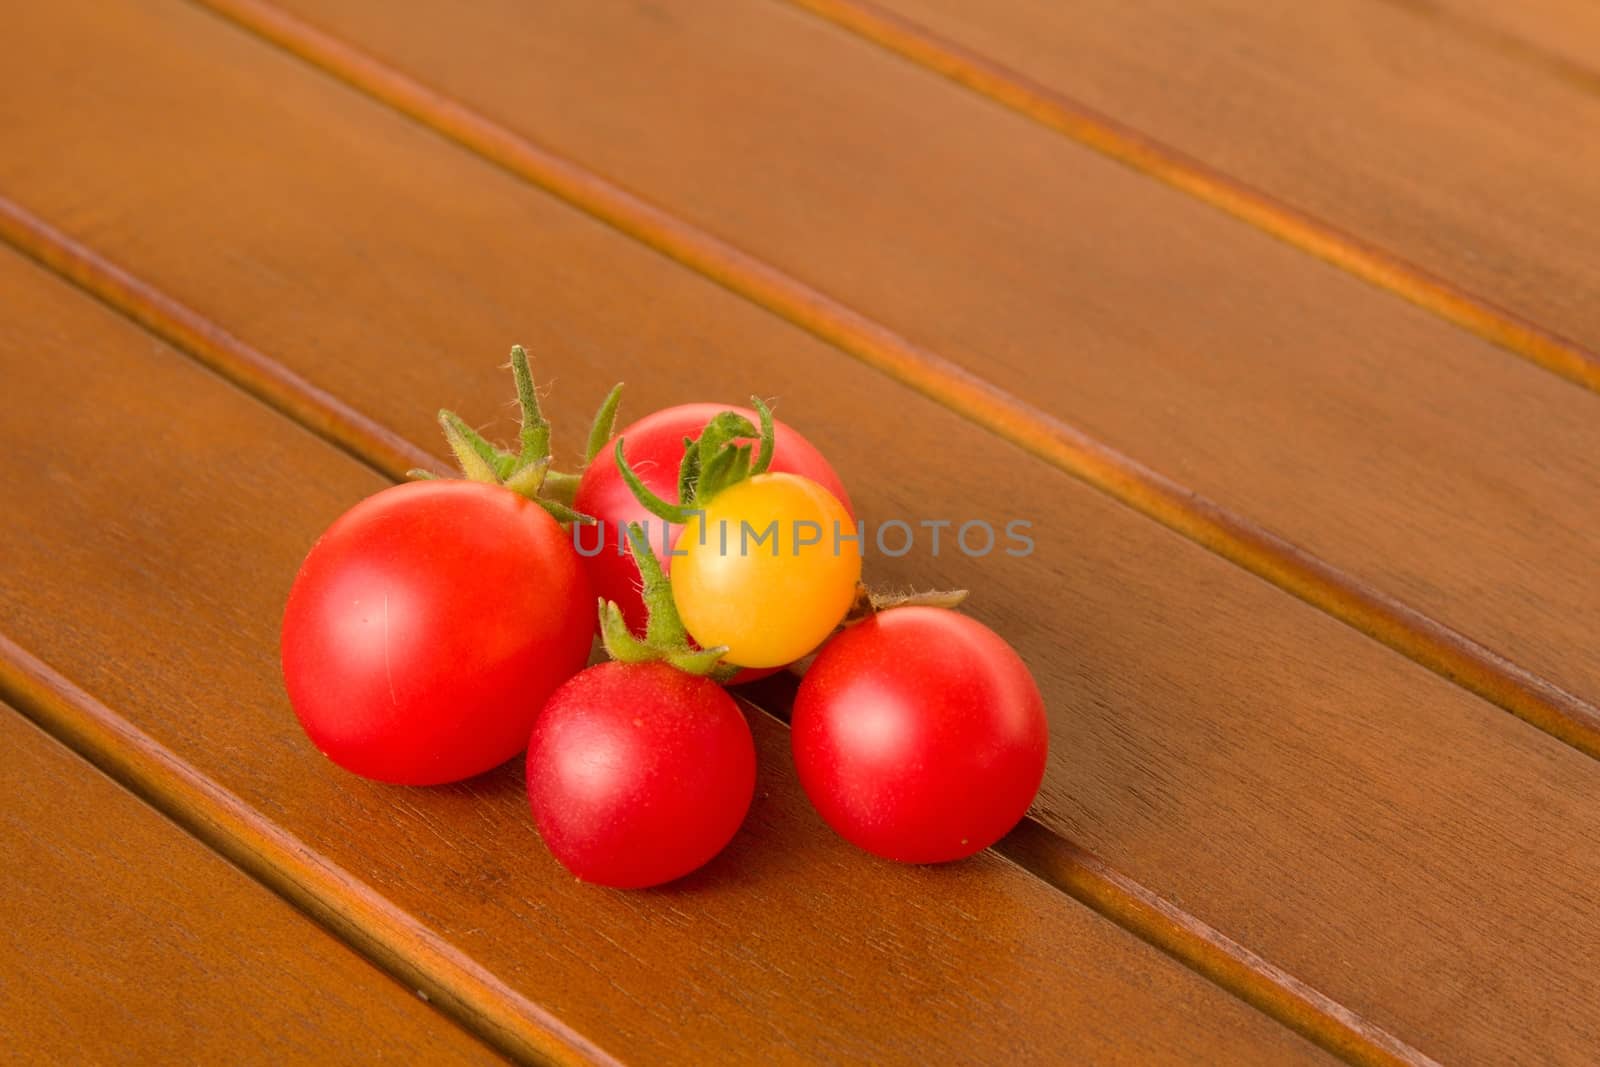 Photo shows a detail of the colourful tomatoes on a table.